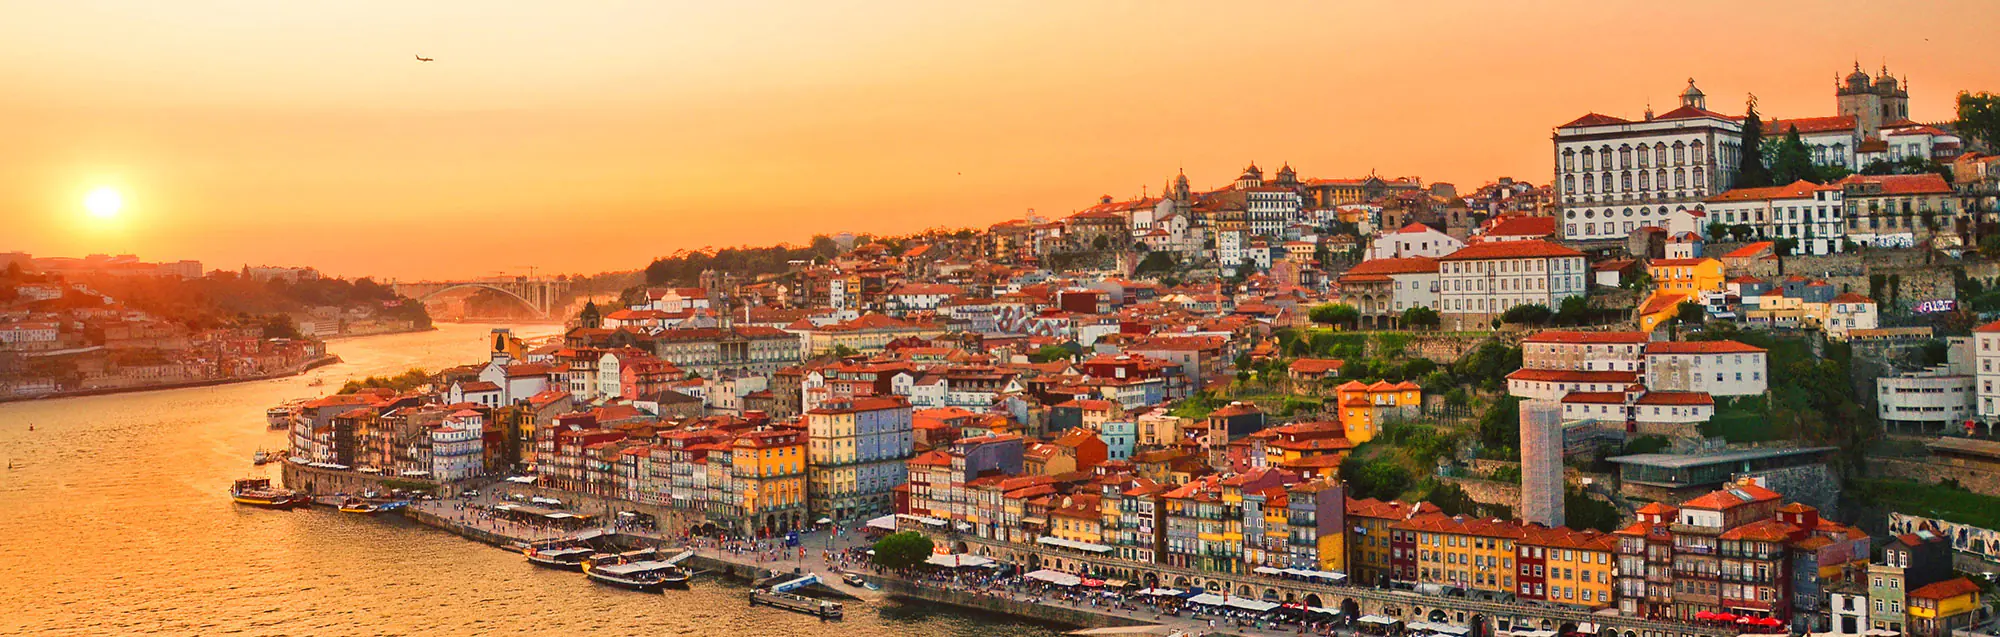 How to get your visa to study in Portugal